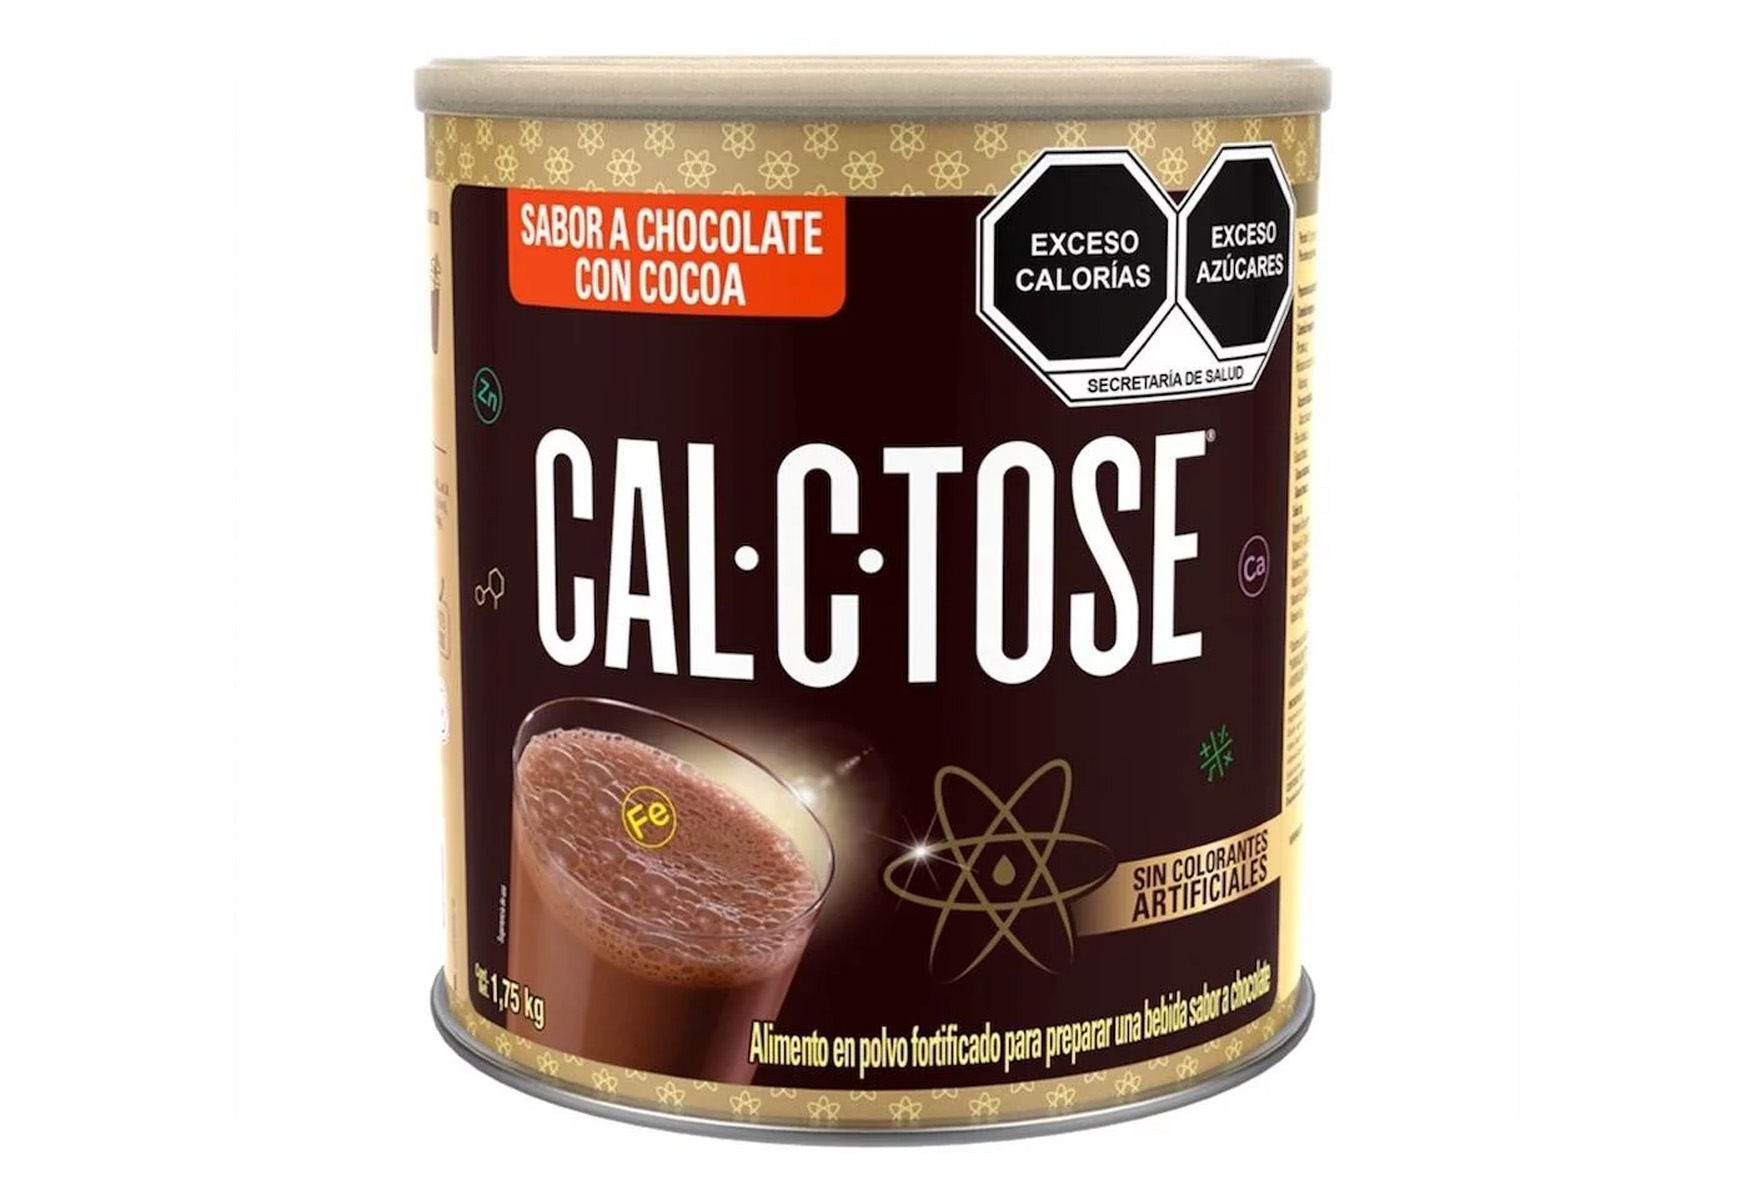 20-calcetose-nutrition-facts